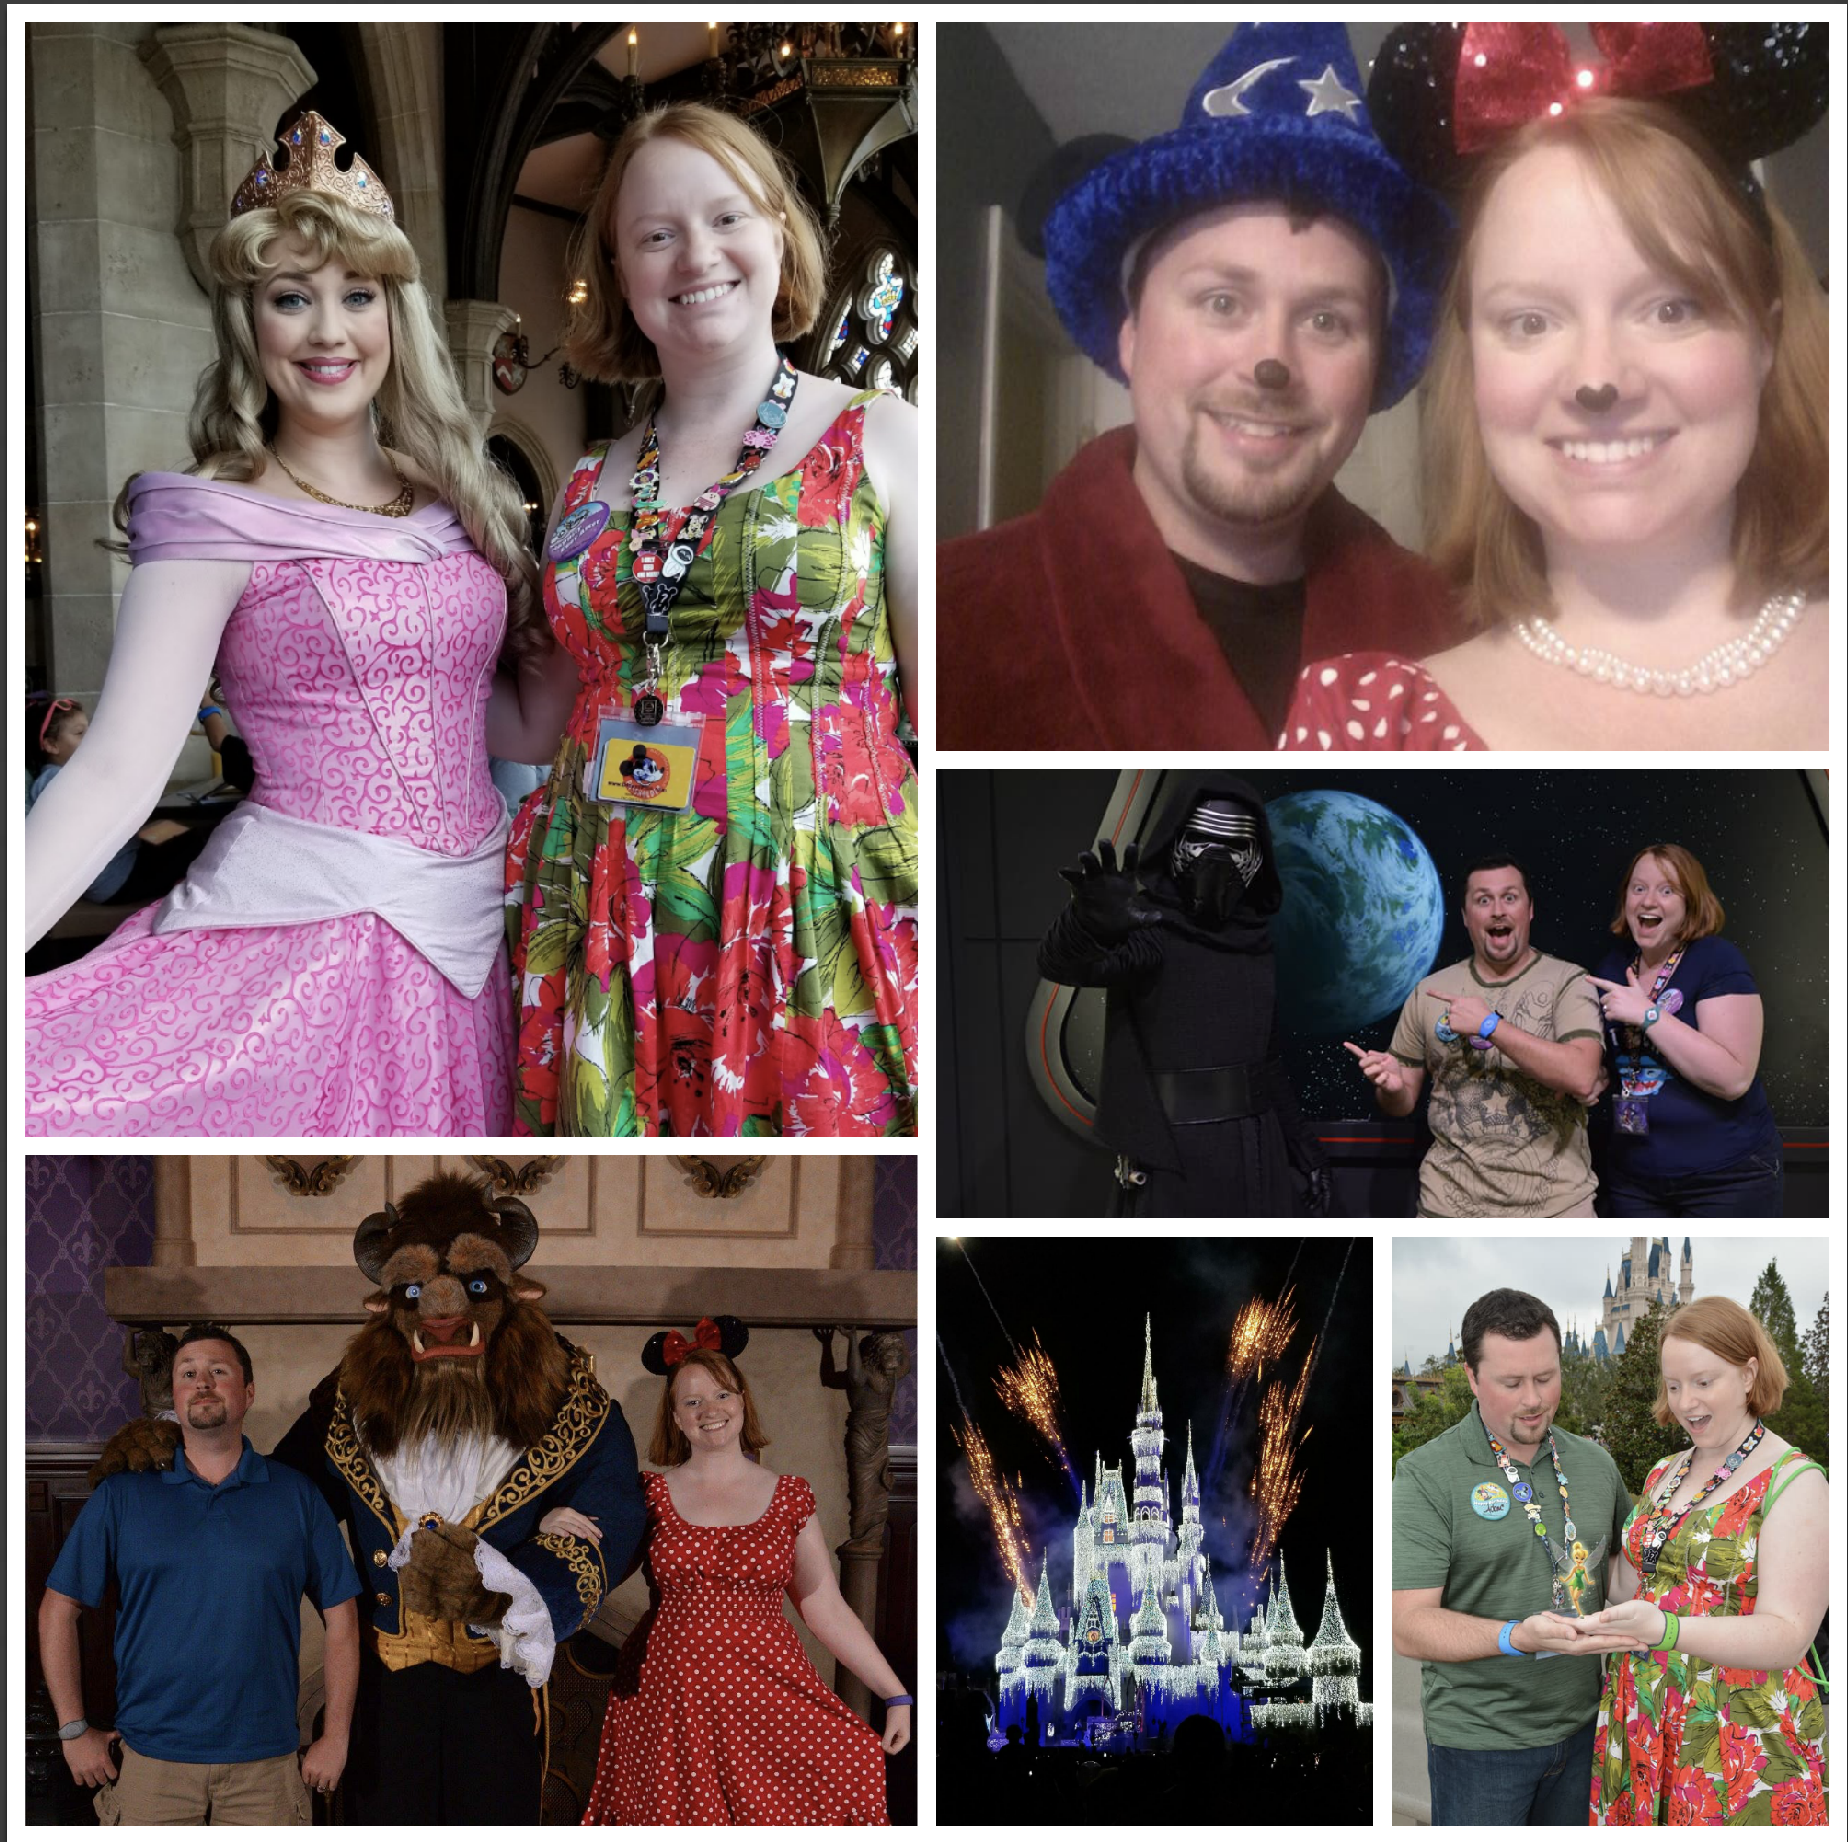 collage of Jessica with Sleeping Beauty, Jessica and Adam dressed as Mickey and Minnie Mouse, Jessica in Minnie Mouse costume with the Beast, Cinderella's Castle with fireworks, Jessica and Adam with Tinkerbelle